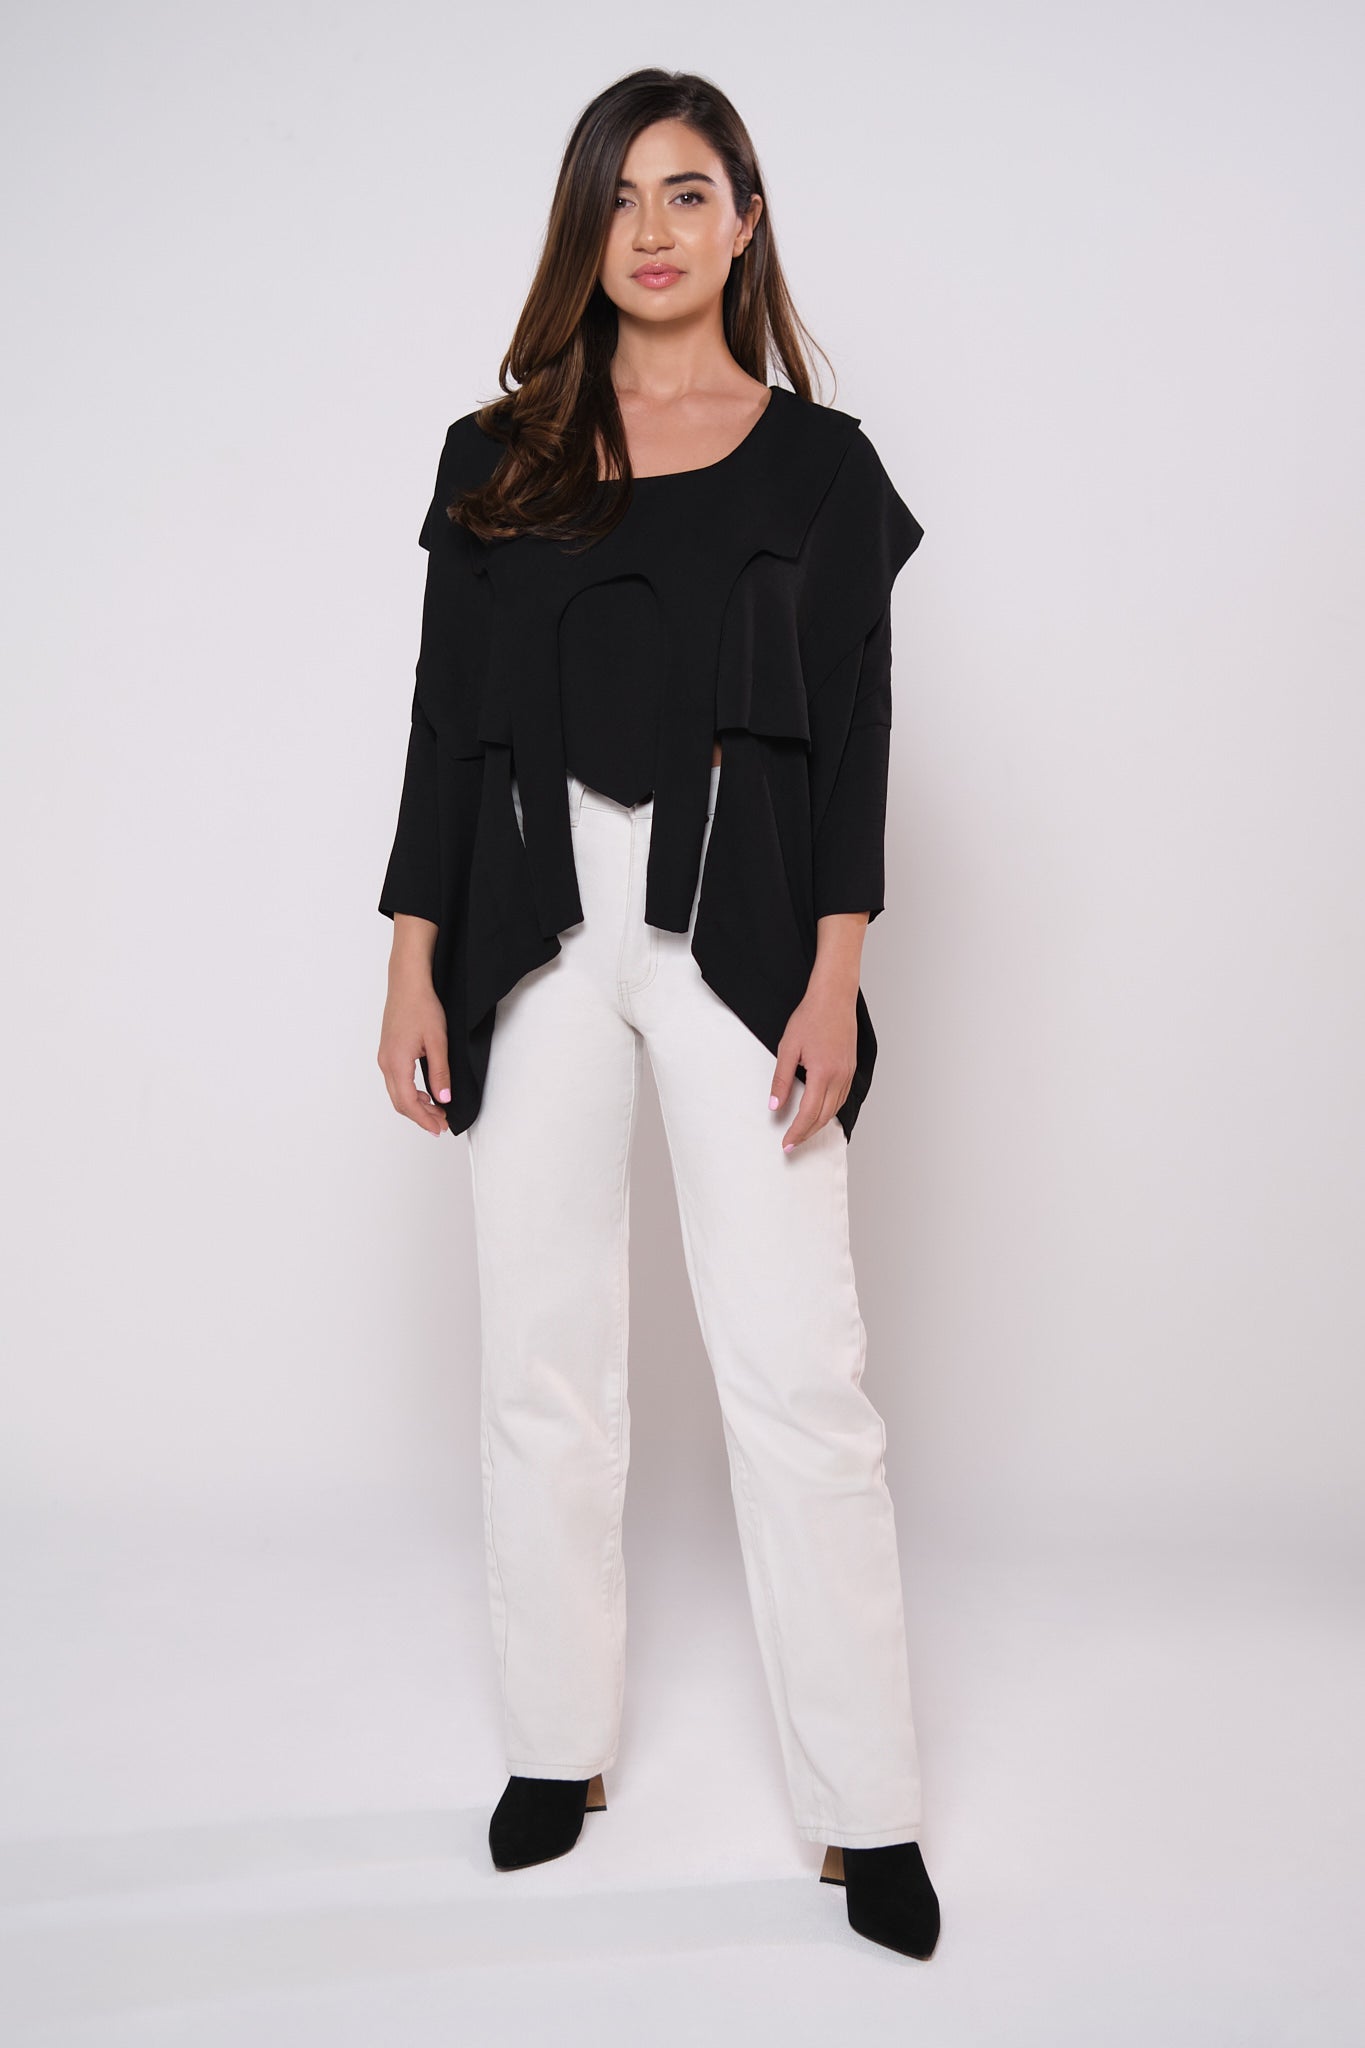 Cut out layered shirt in black